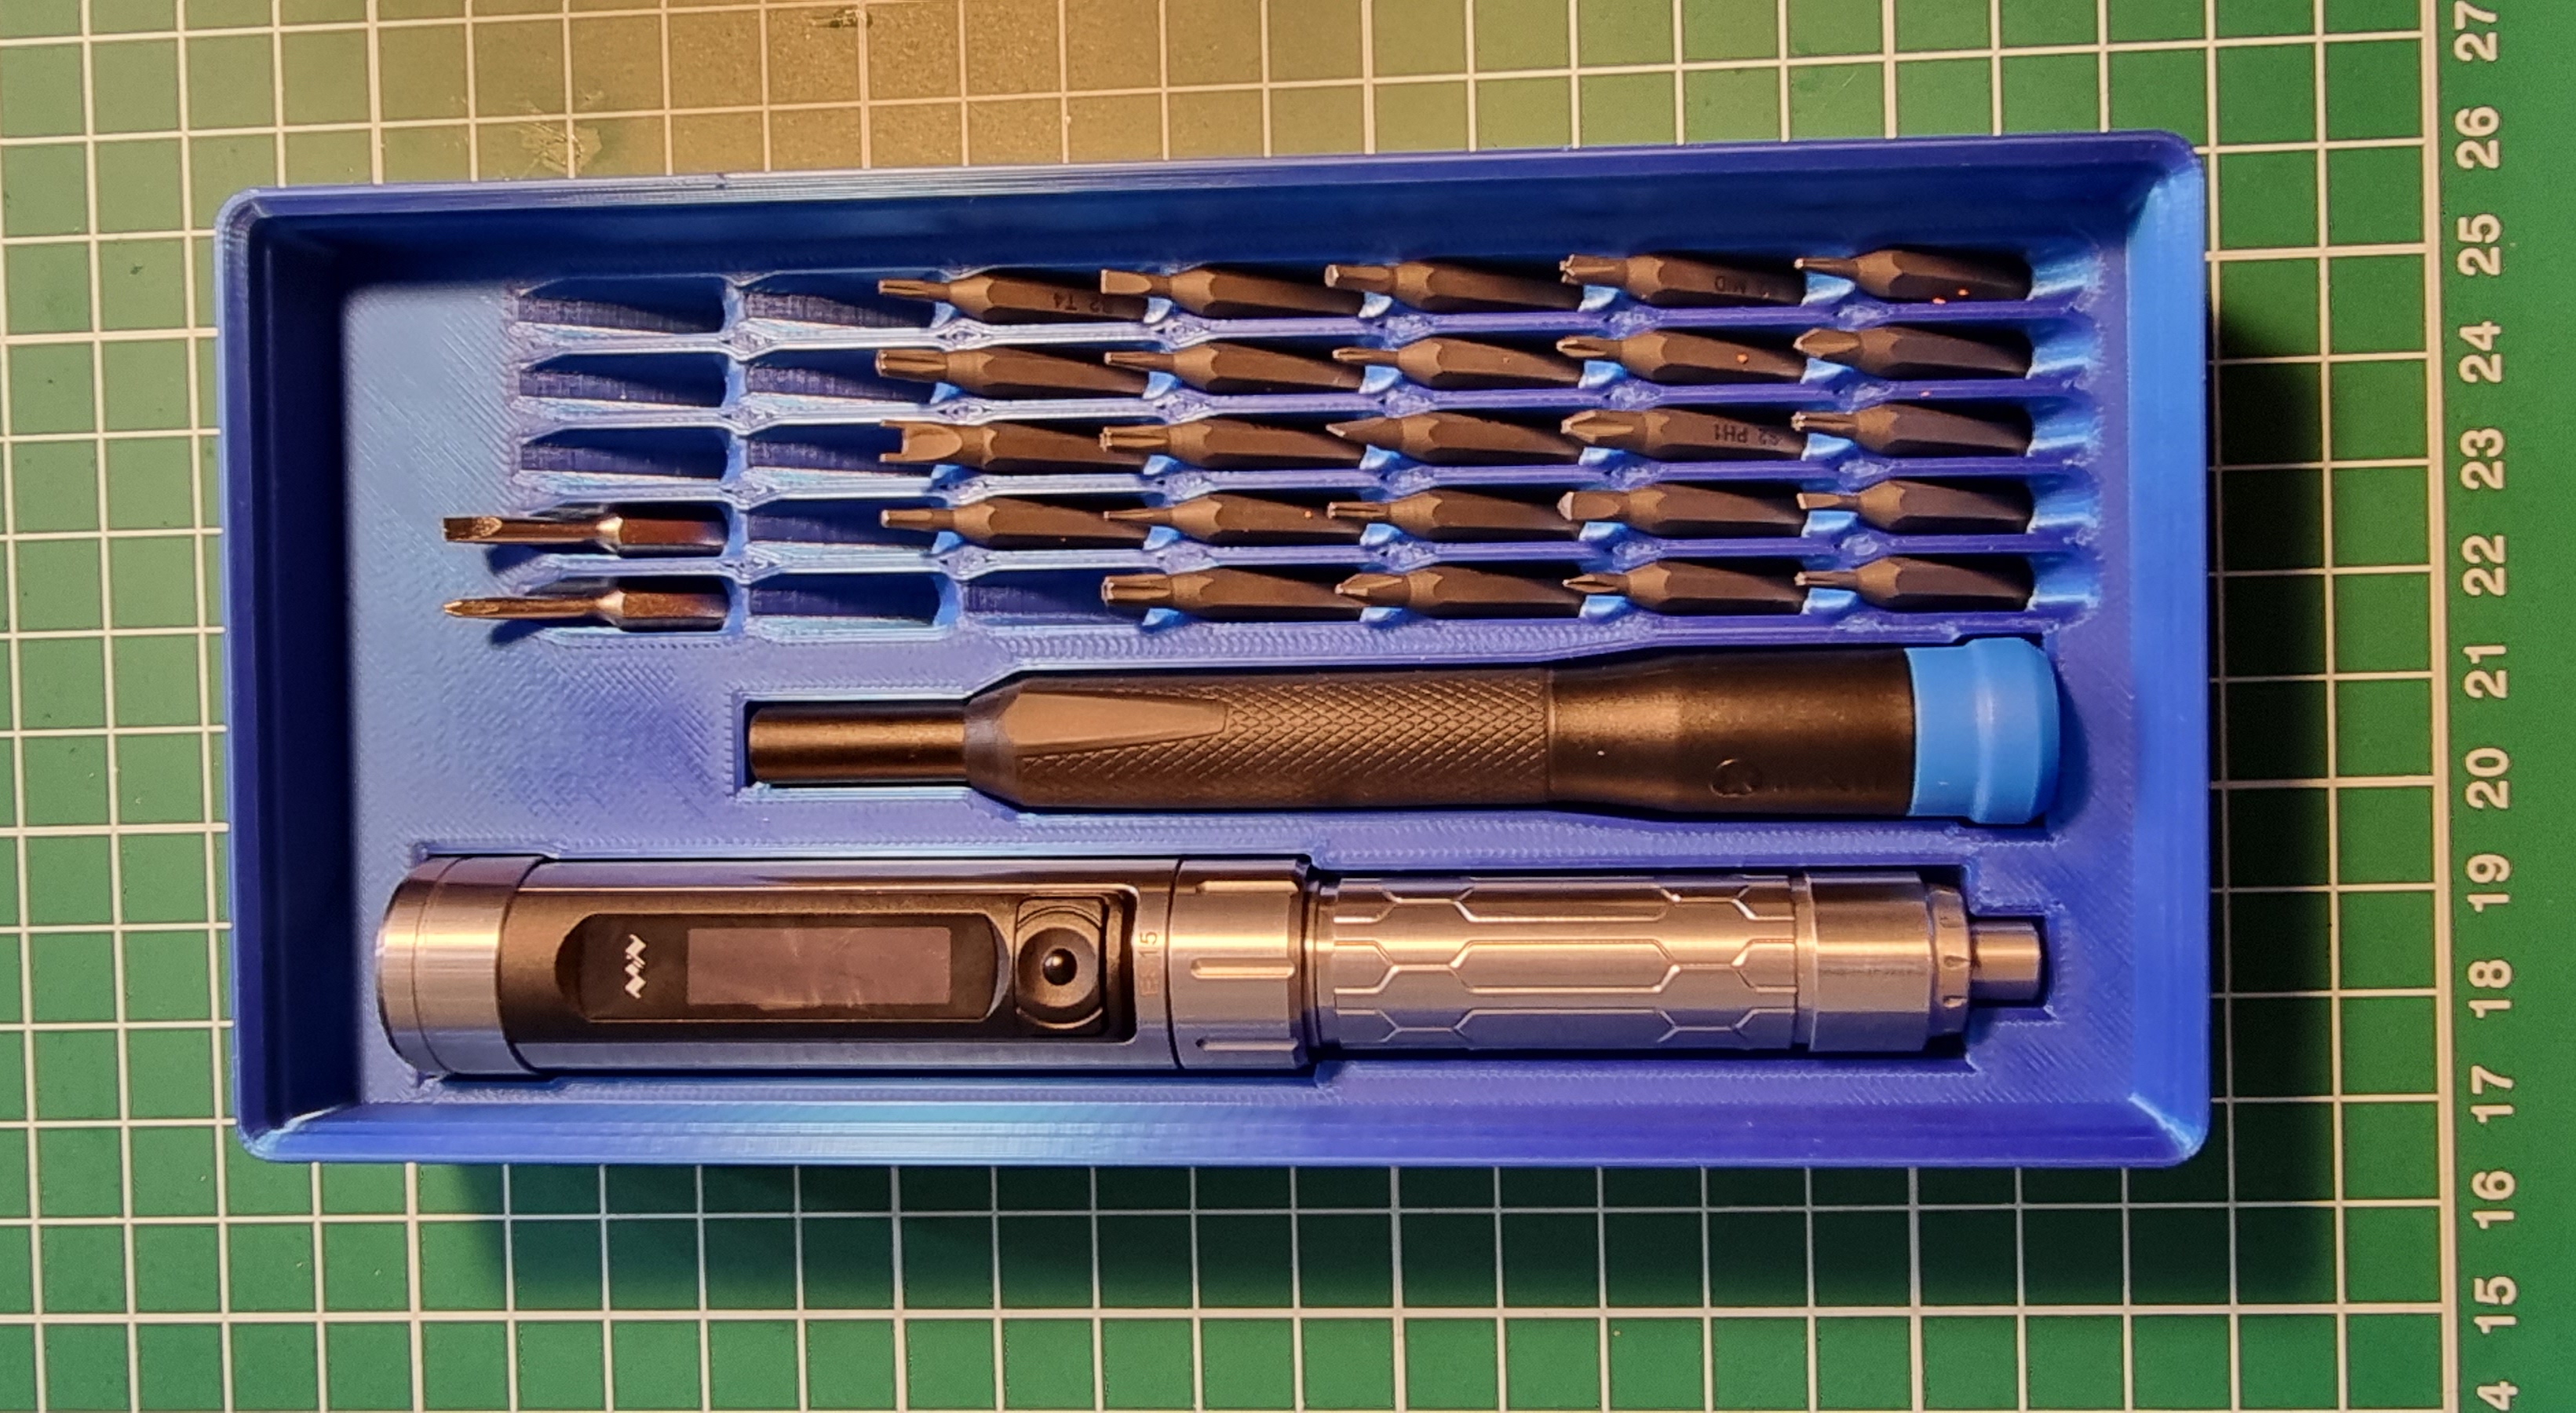 MiniWare ES15 and iFixit screwdriver + bits - Gridfinity holder